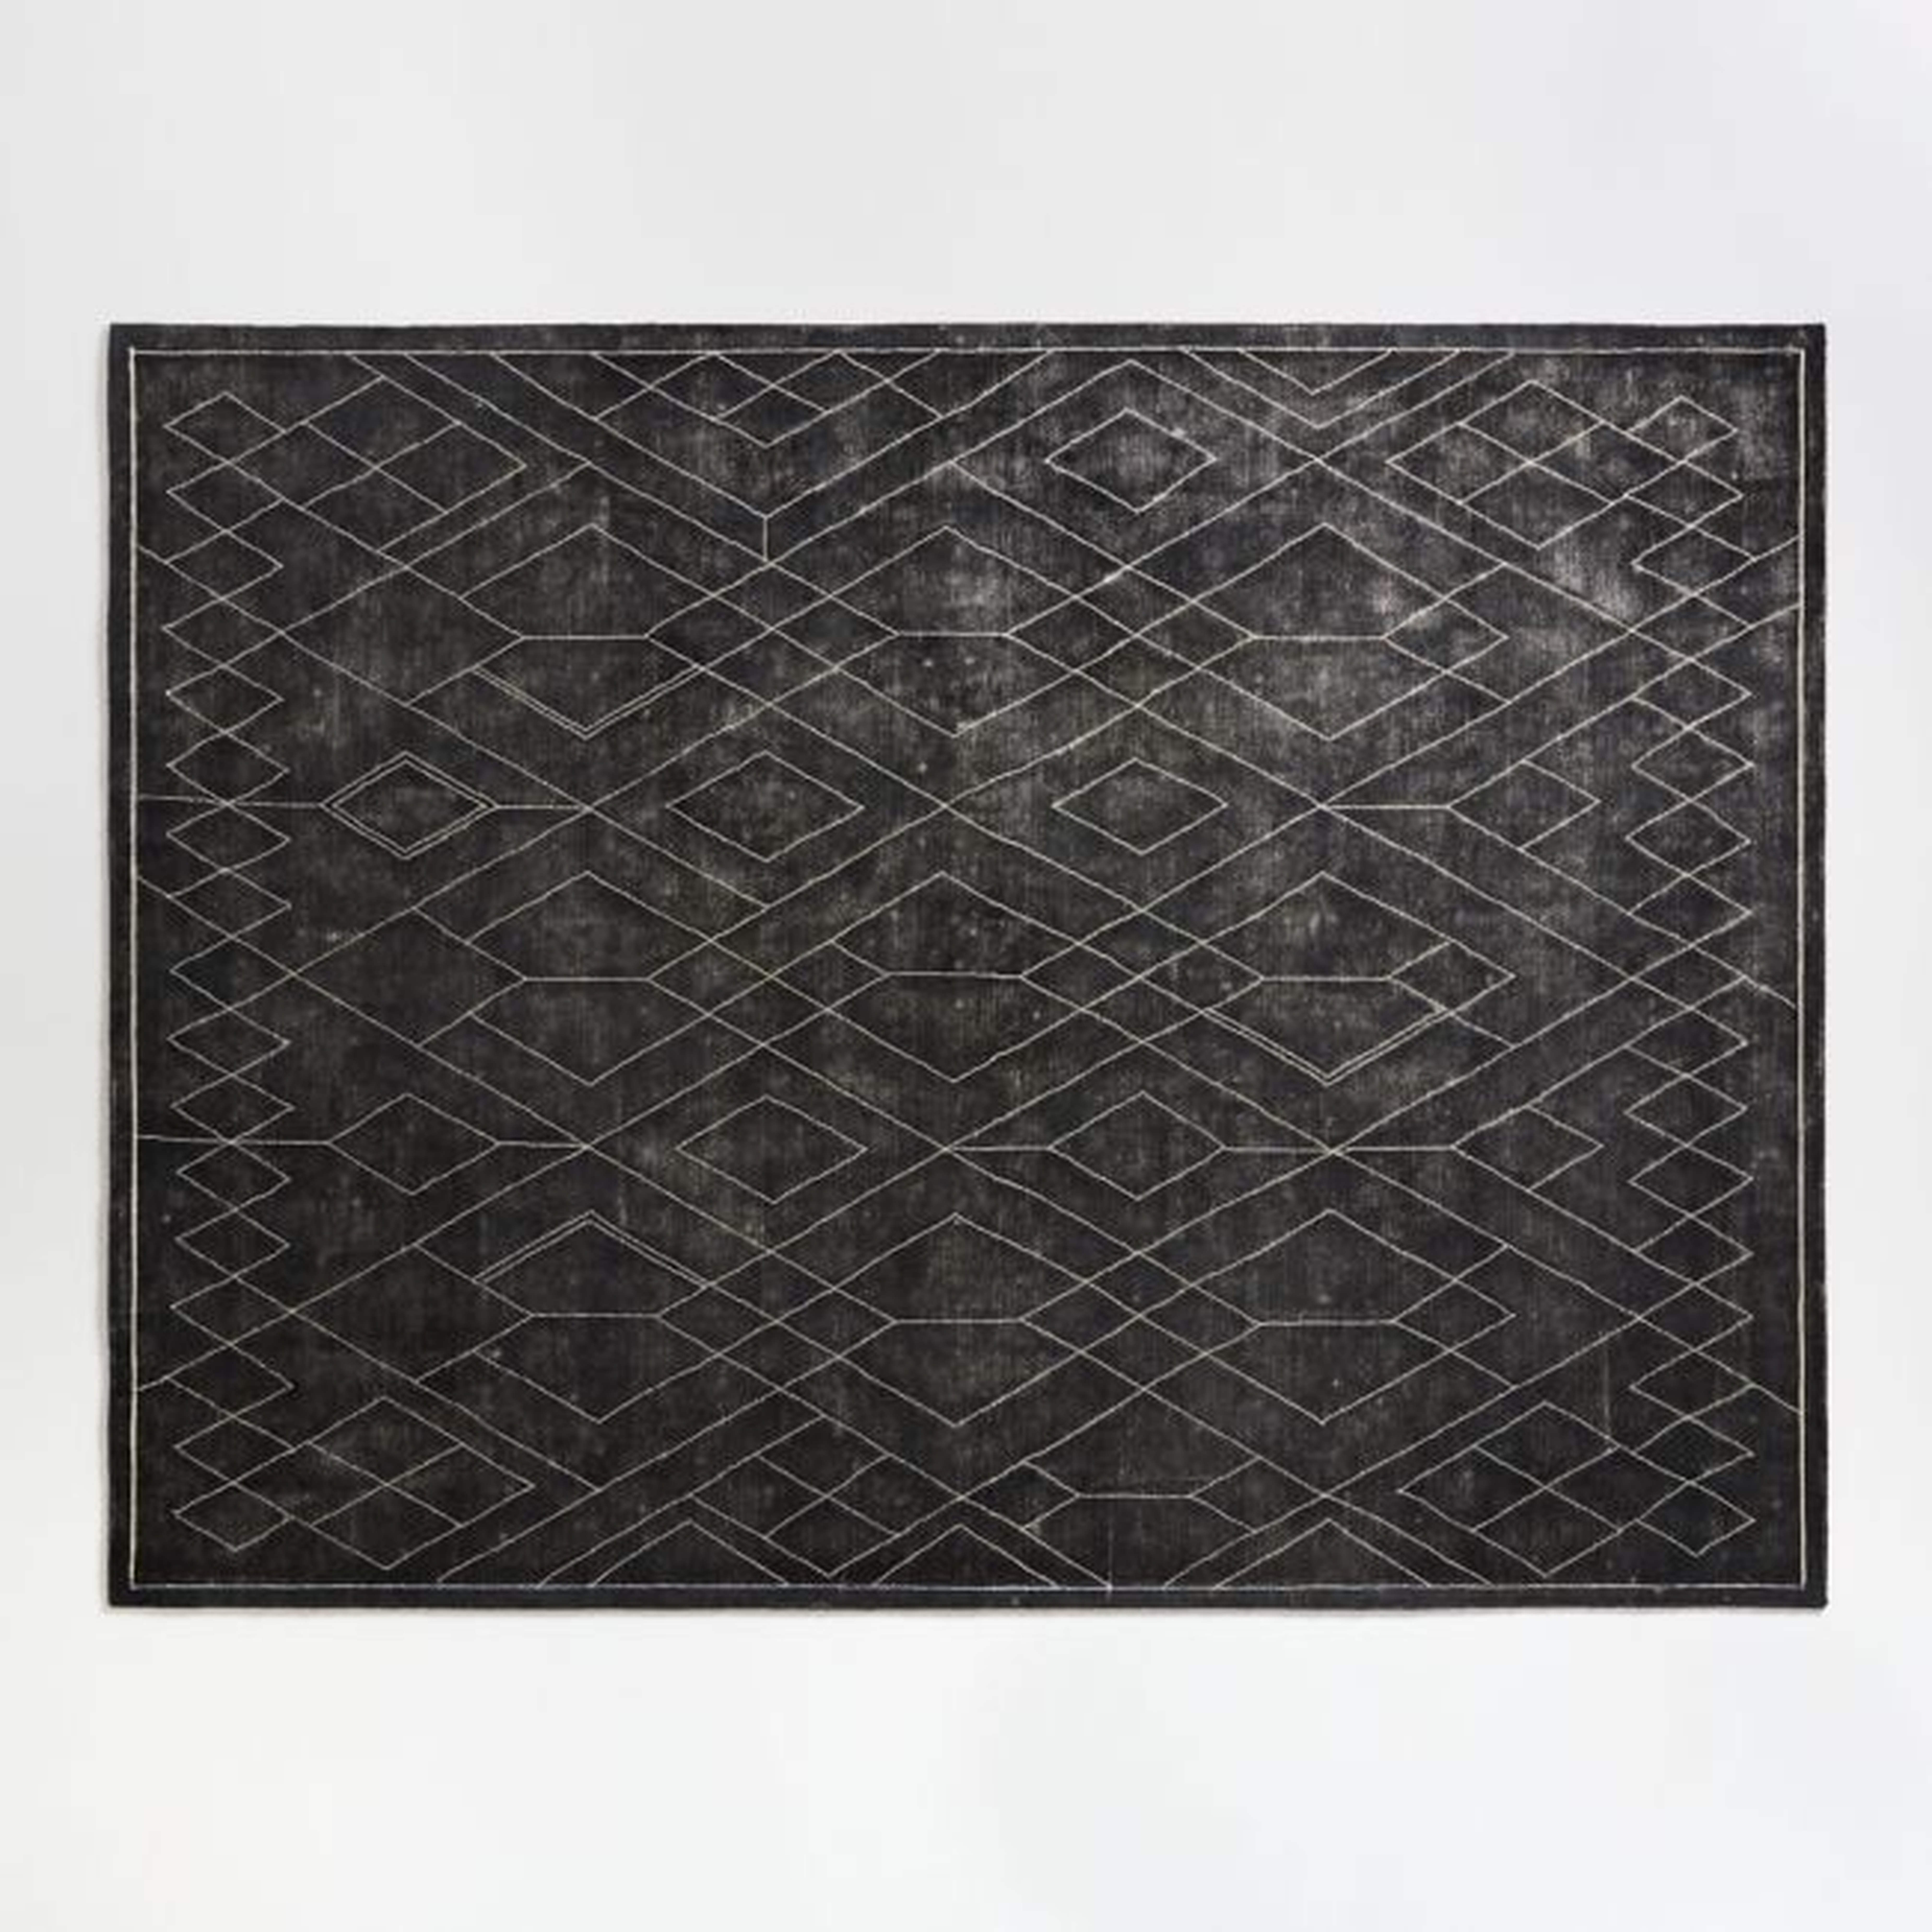 Ruell Black Area Rug 8'x10' - Crate and Barrel